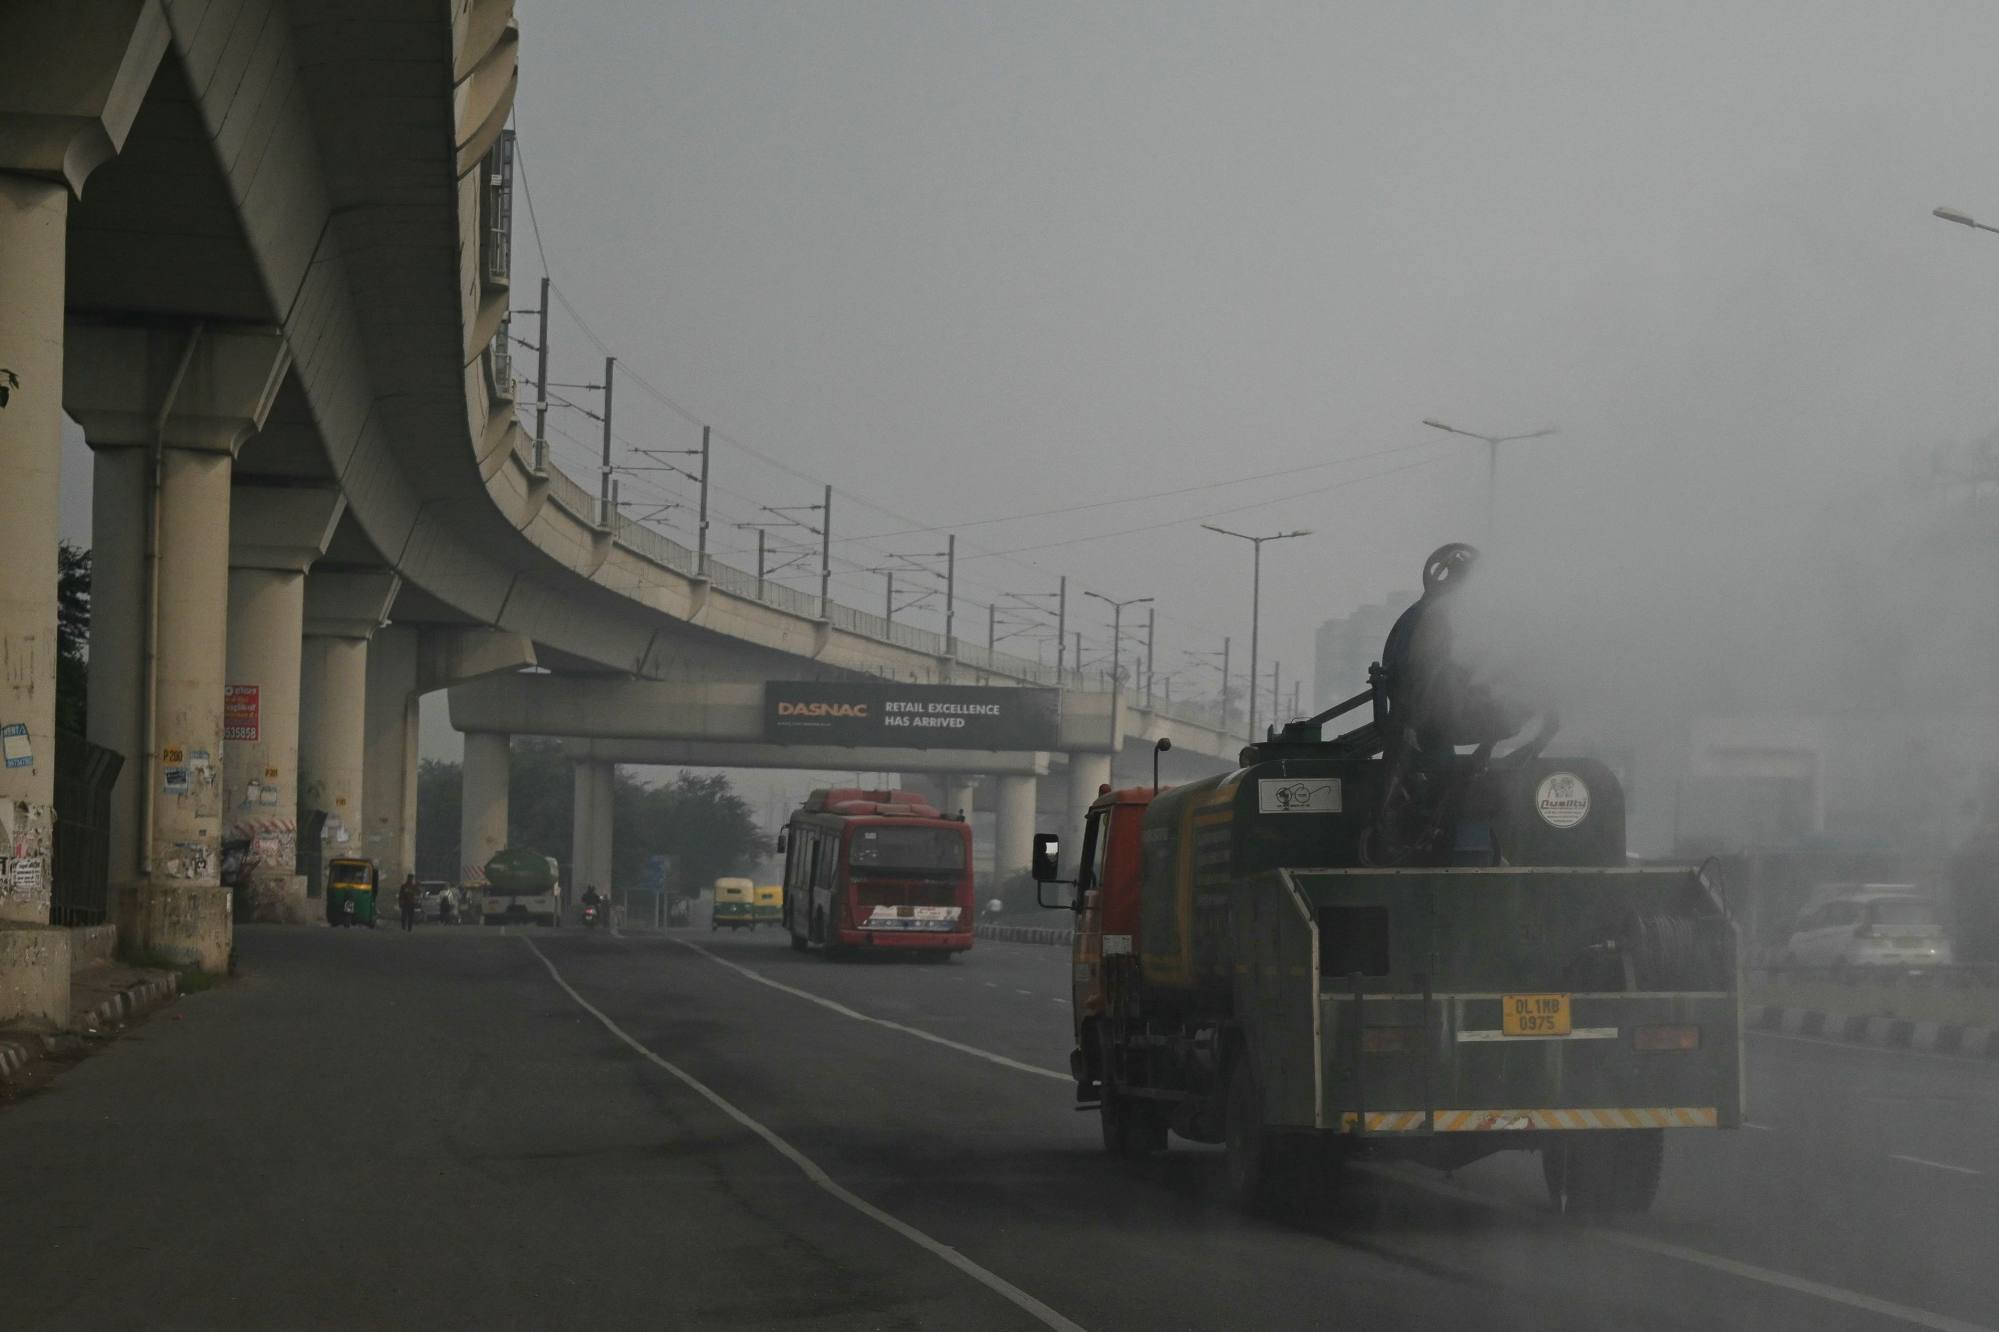 While China took an aggressive approach to combating pollution over the last decade, India’s efforts to date have been less ambitious. Photo: AFP